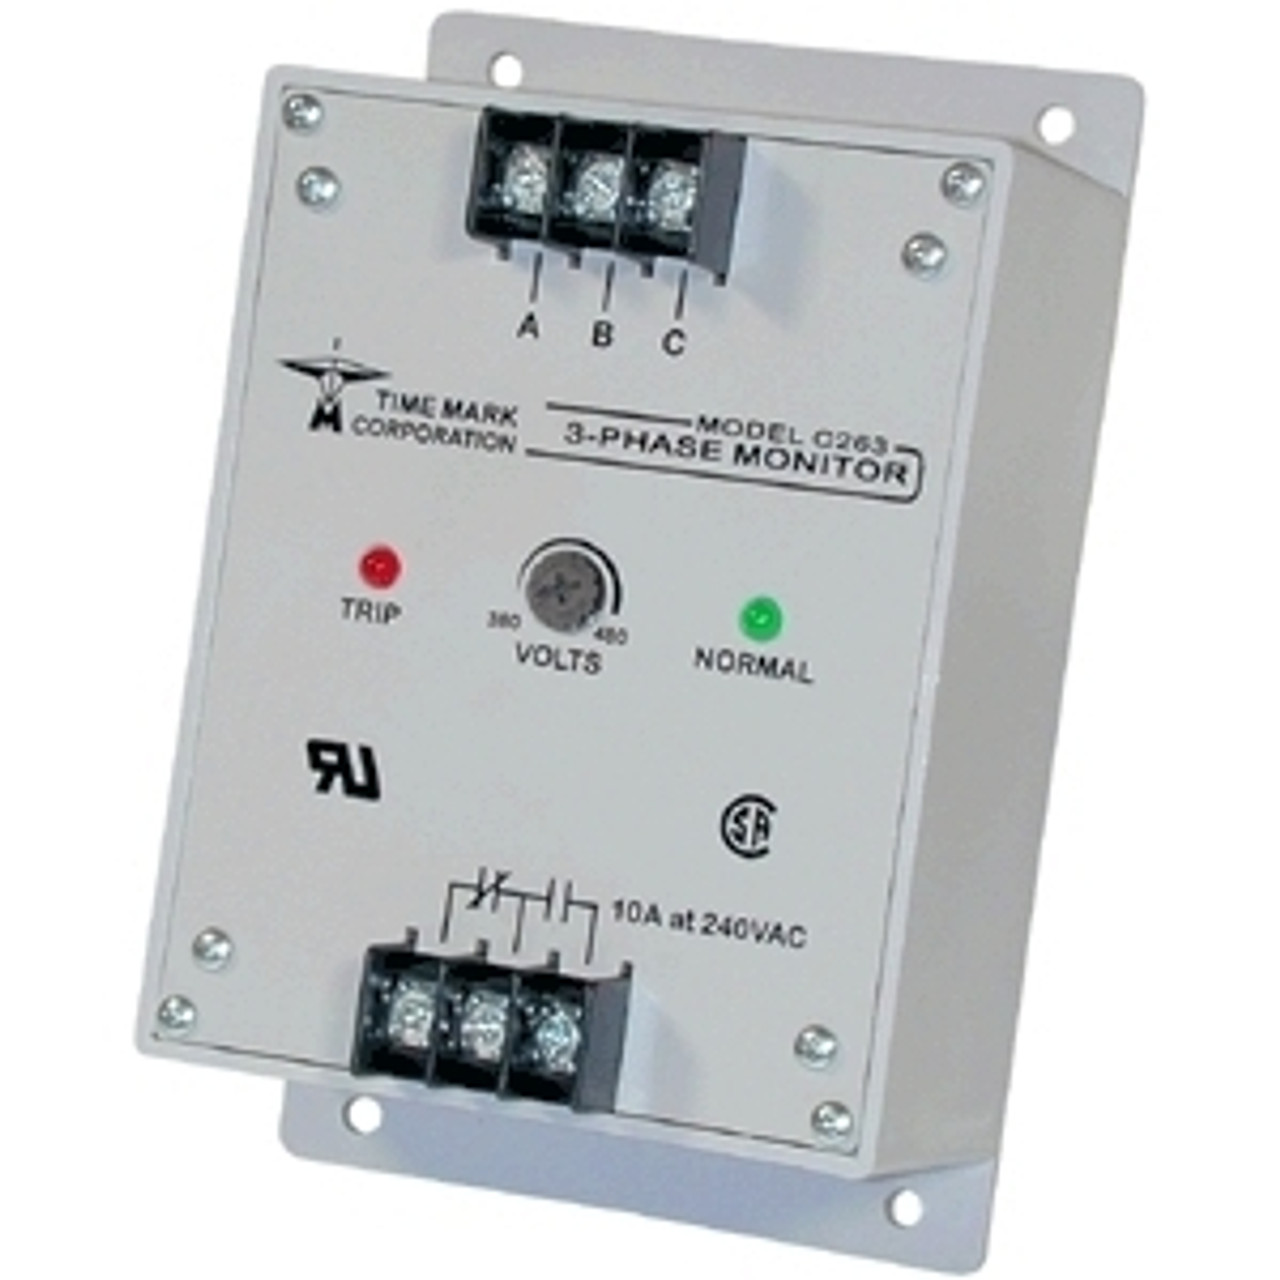 TimeMark D263SGM Phase Monitor Relays